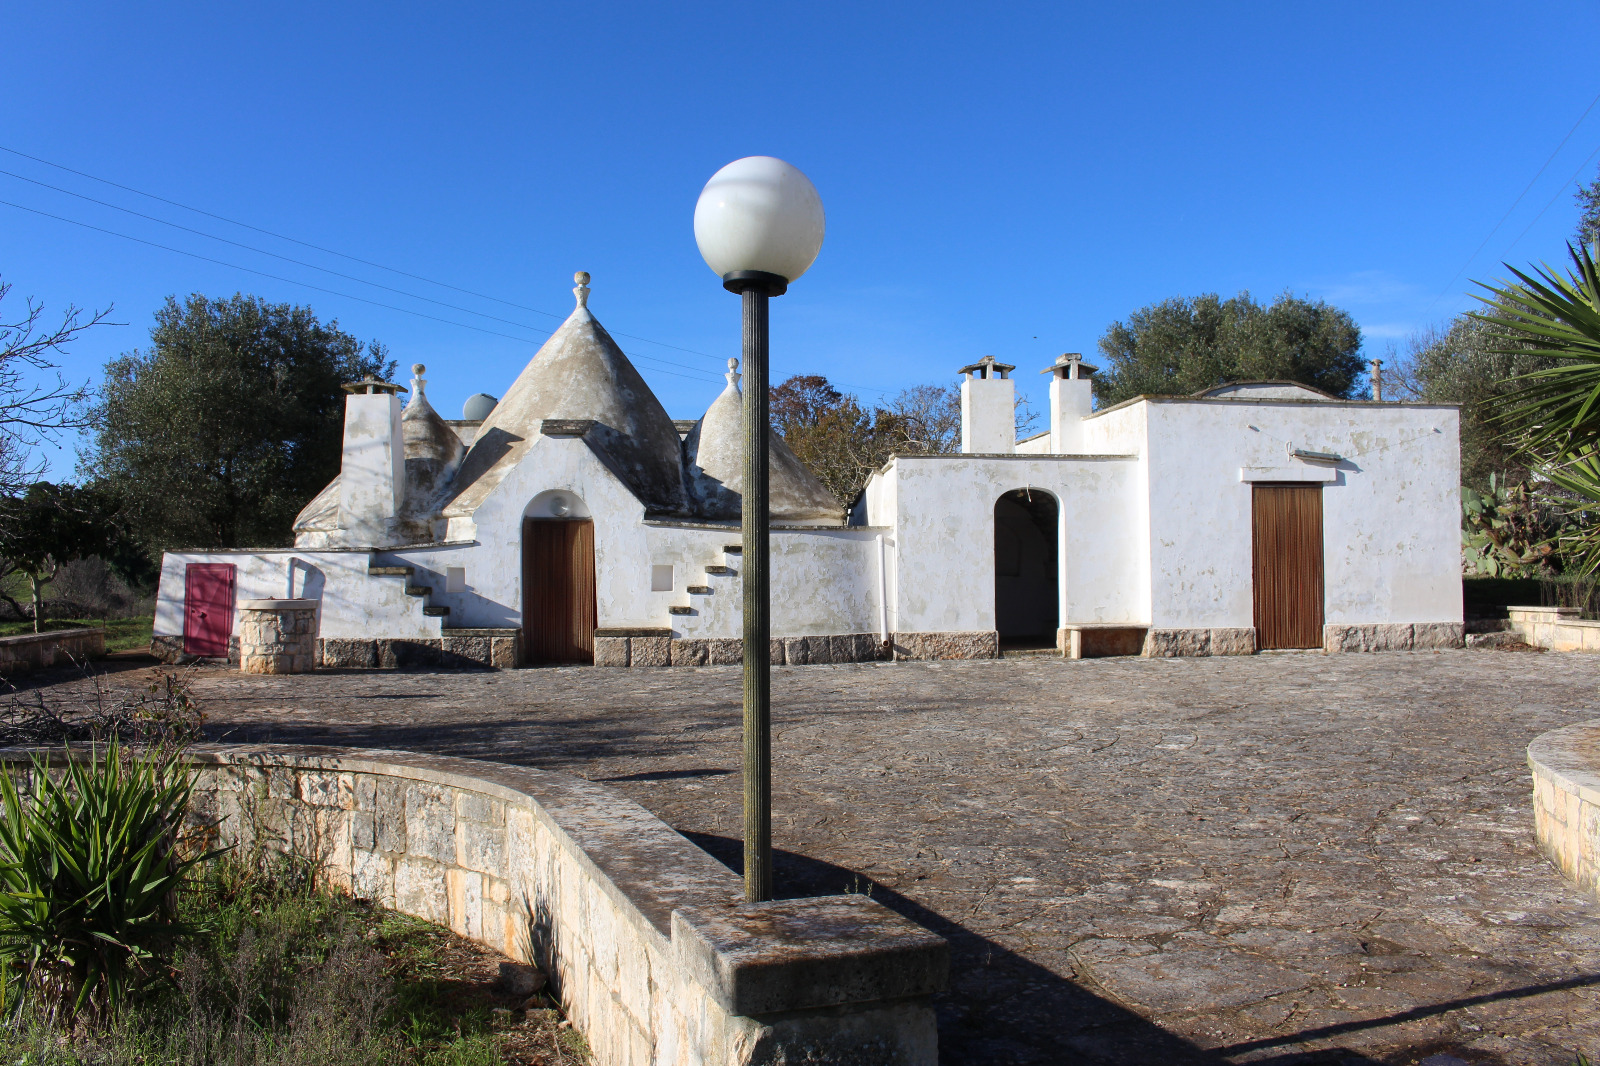 Trulli complex with lamia for sale, two units